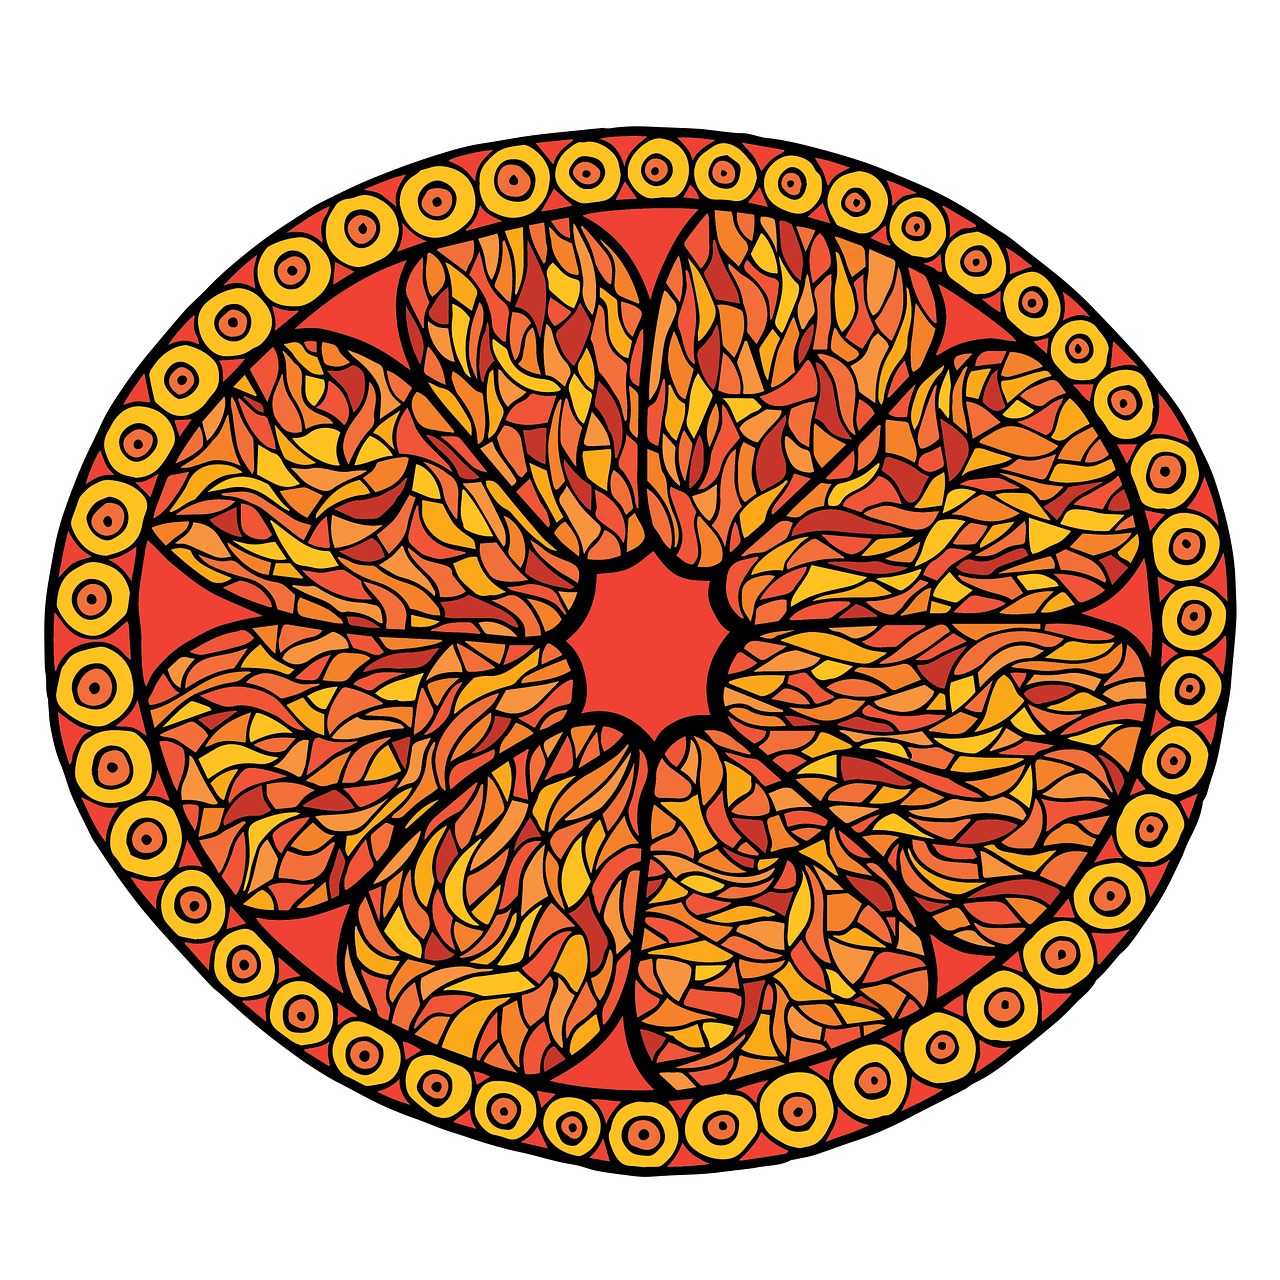 an orange and yellow circular design on a white background, by Tom La Padula, coloring book page, full color illustration, flaming leaves, red yellow black